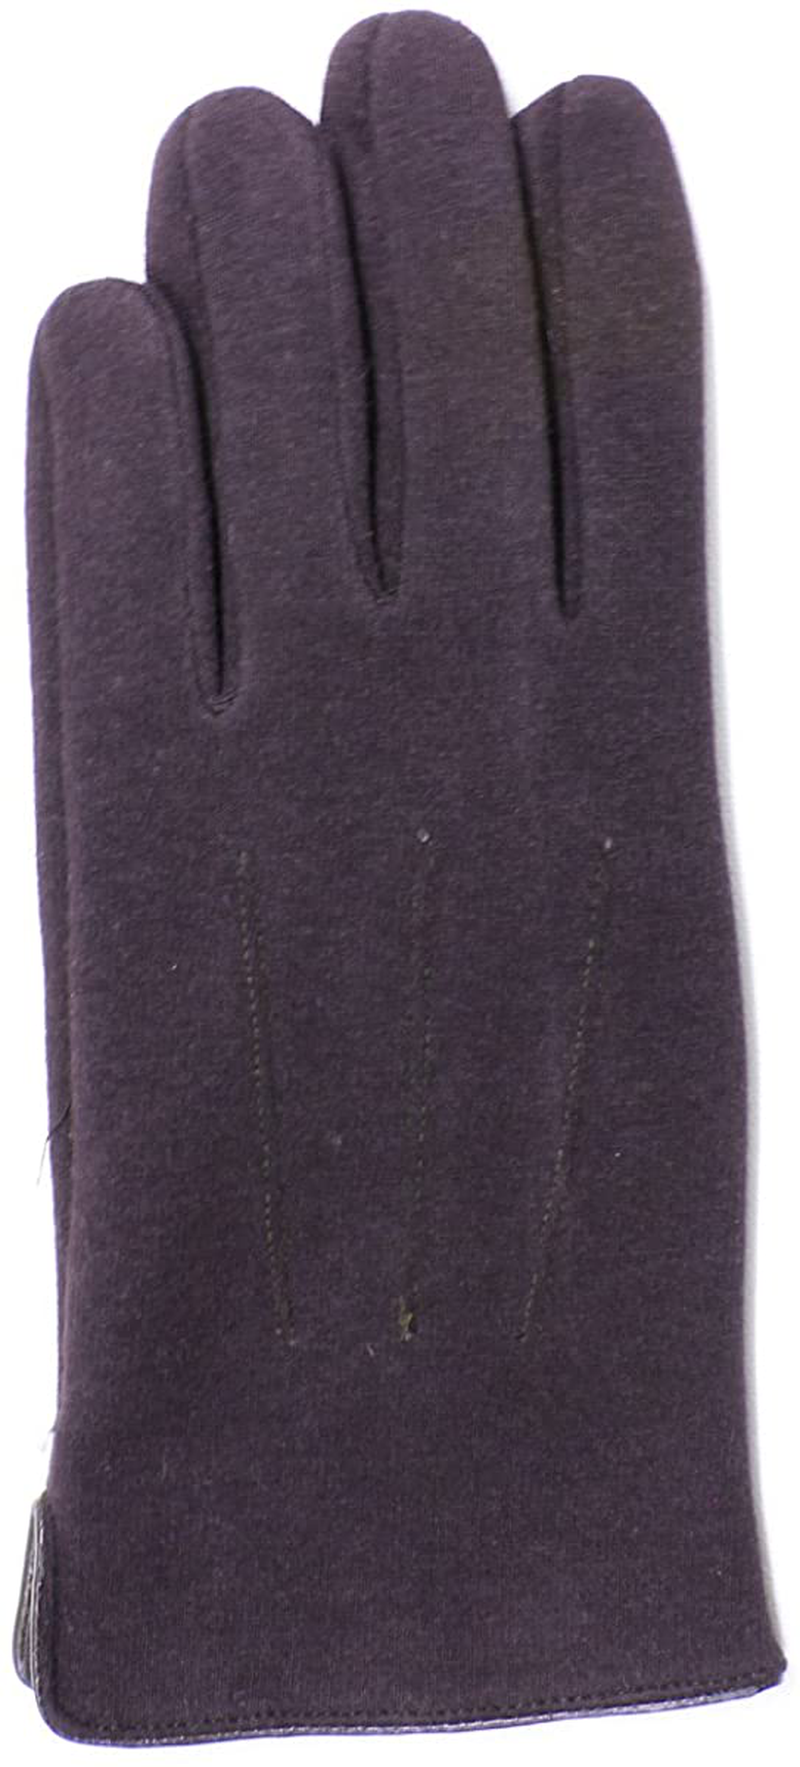 LL- Mens Warm Touch Screen Gloves for Smartphone Texting- Fleece Lined, Driving